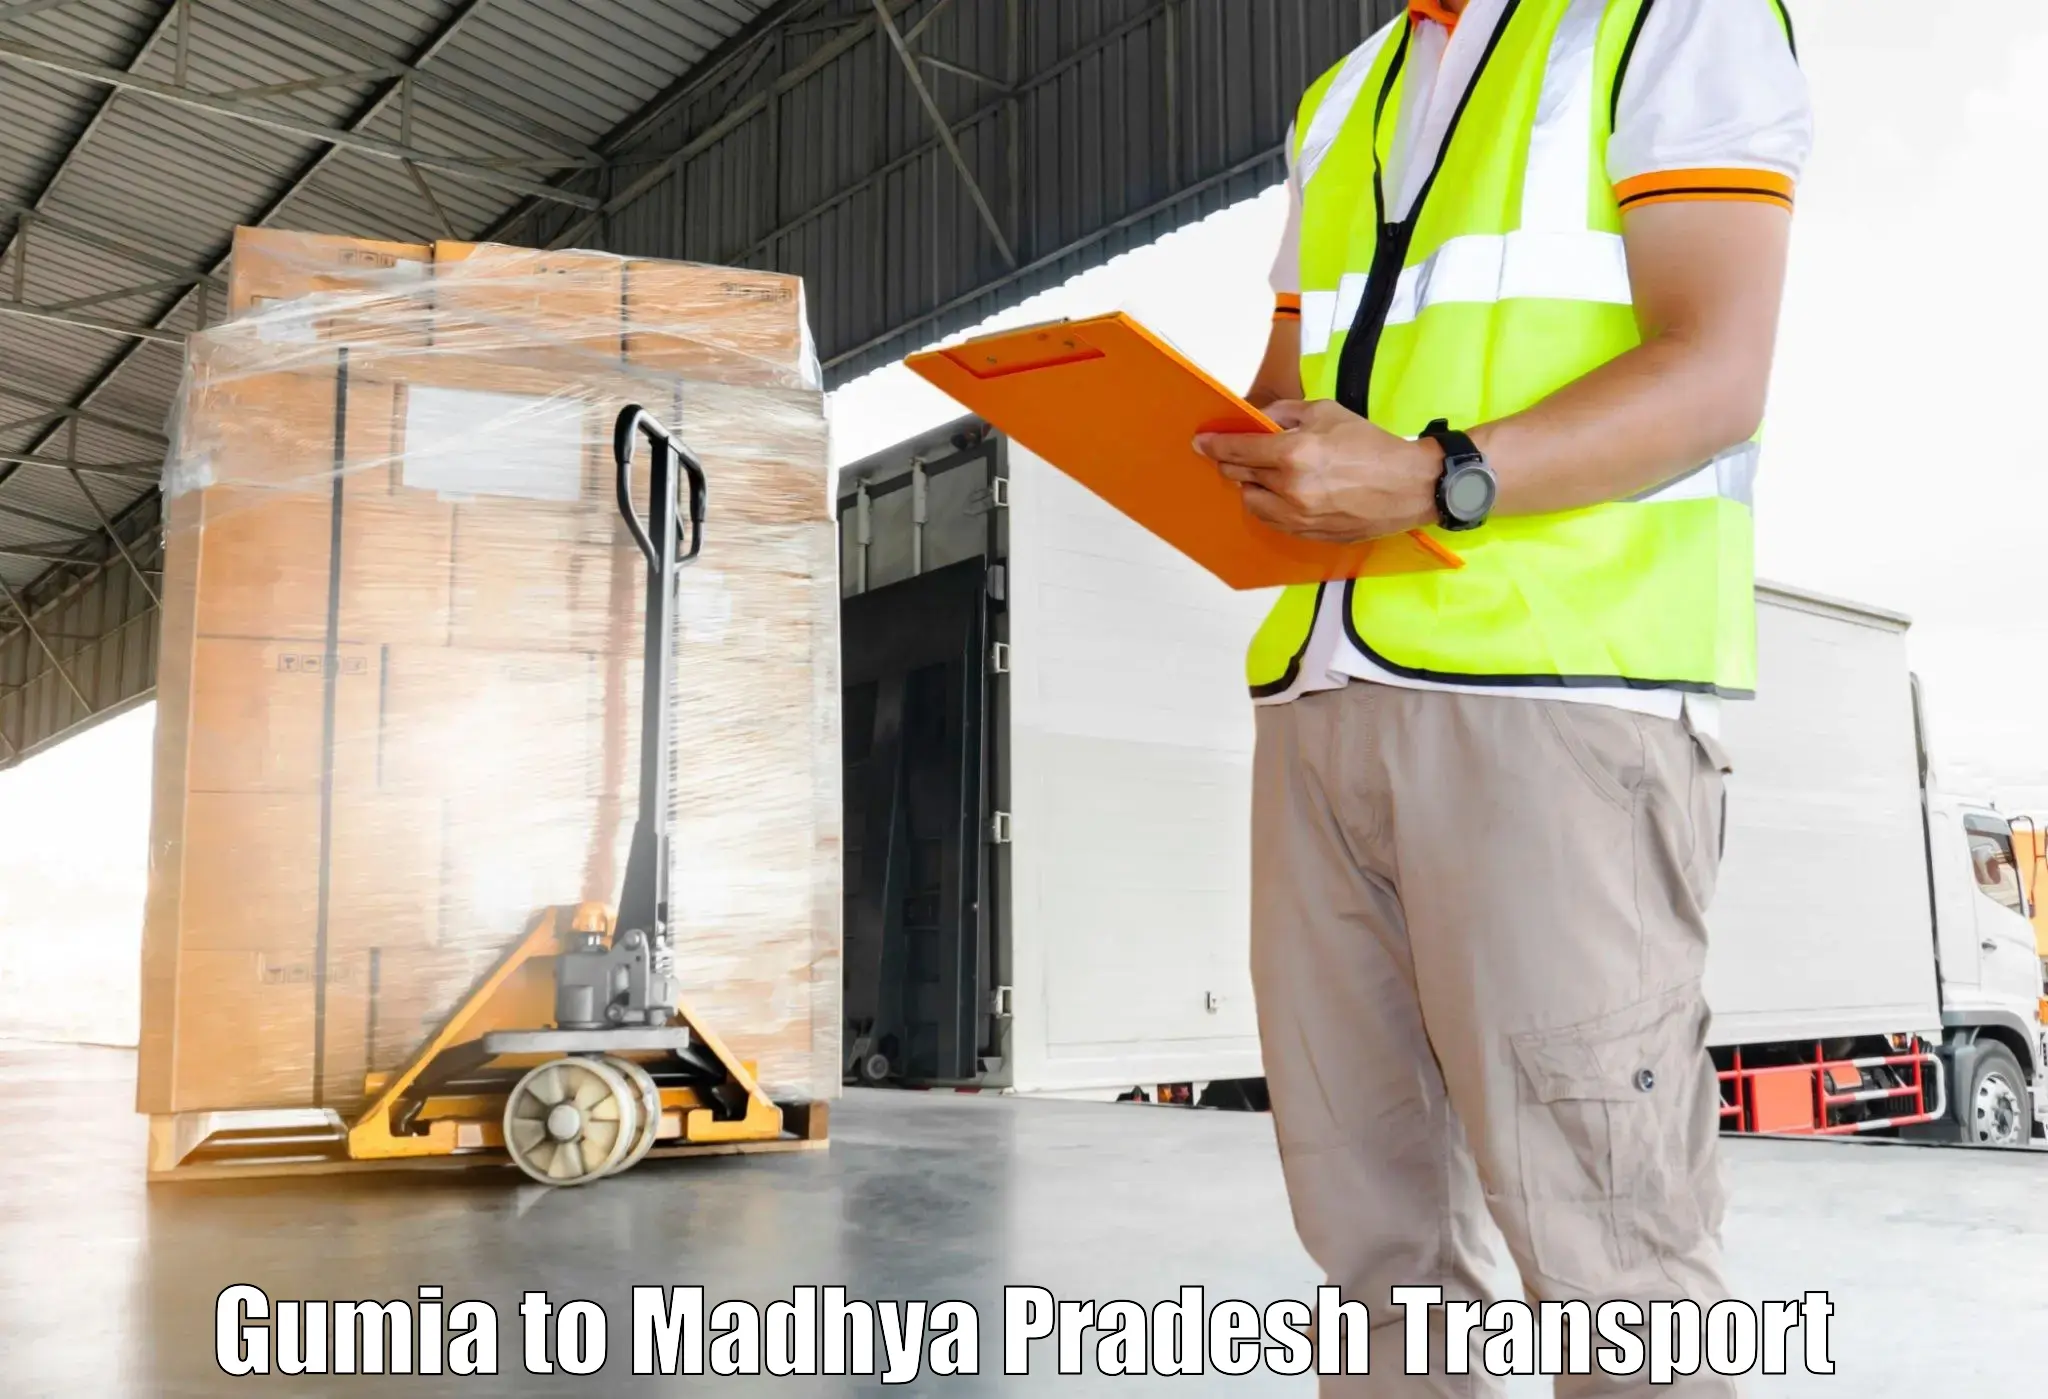 Cargo transport services Gumia to Burhanpur